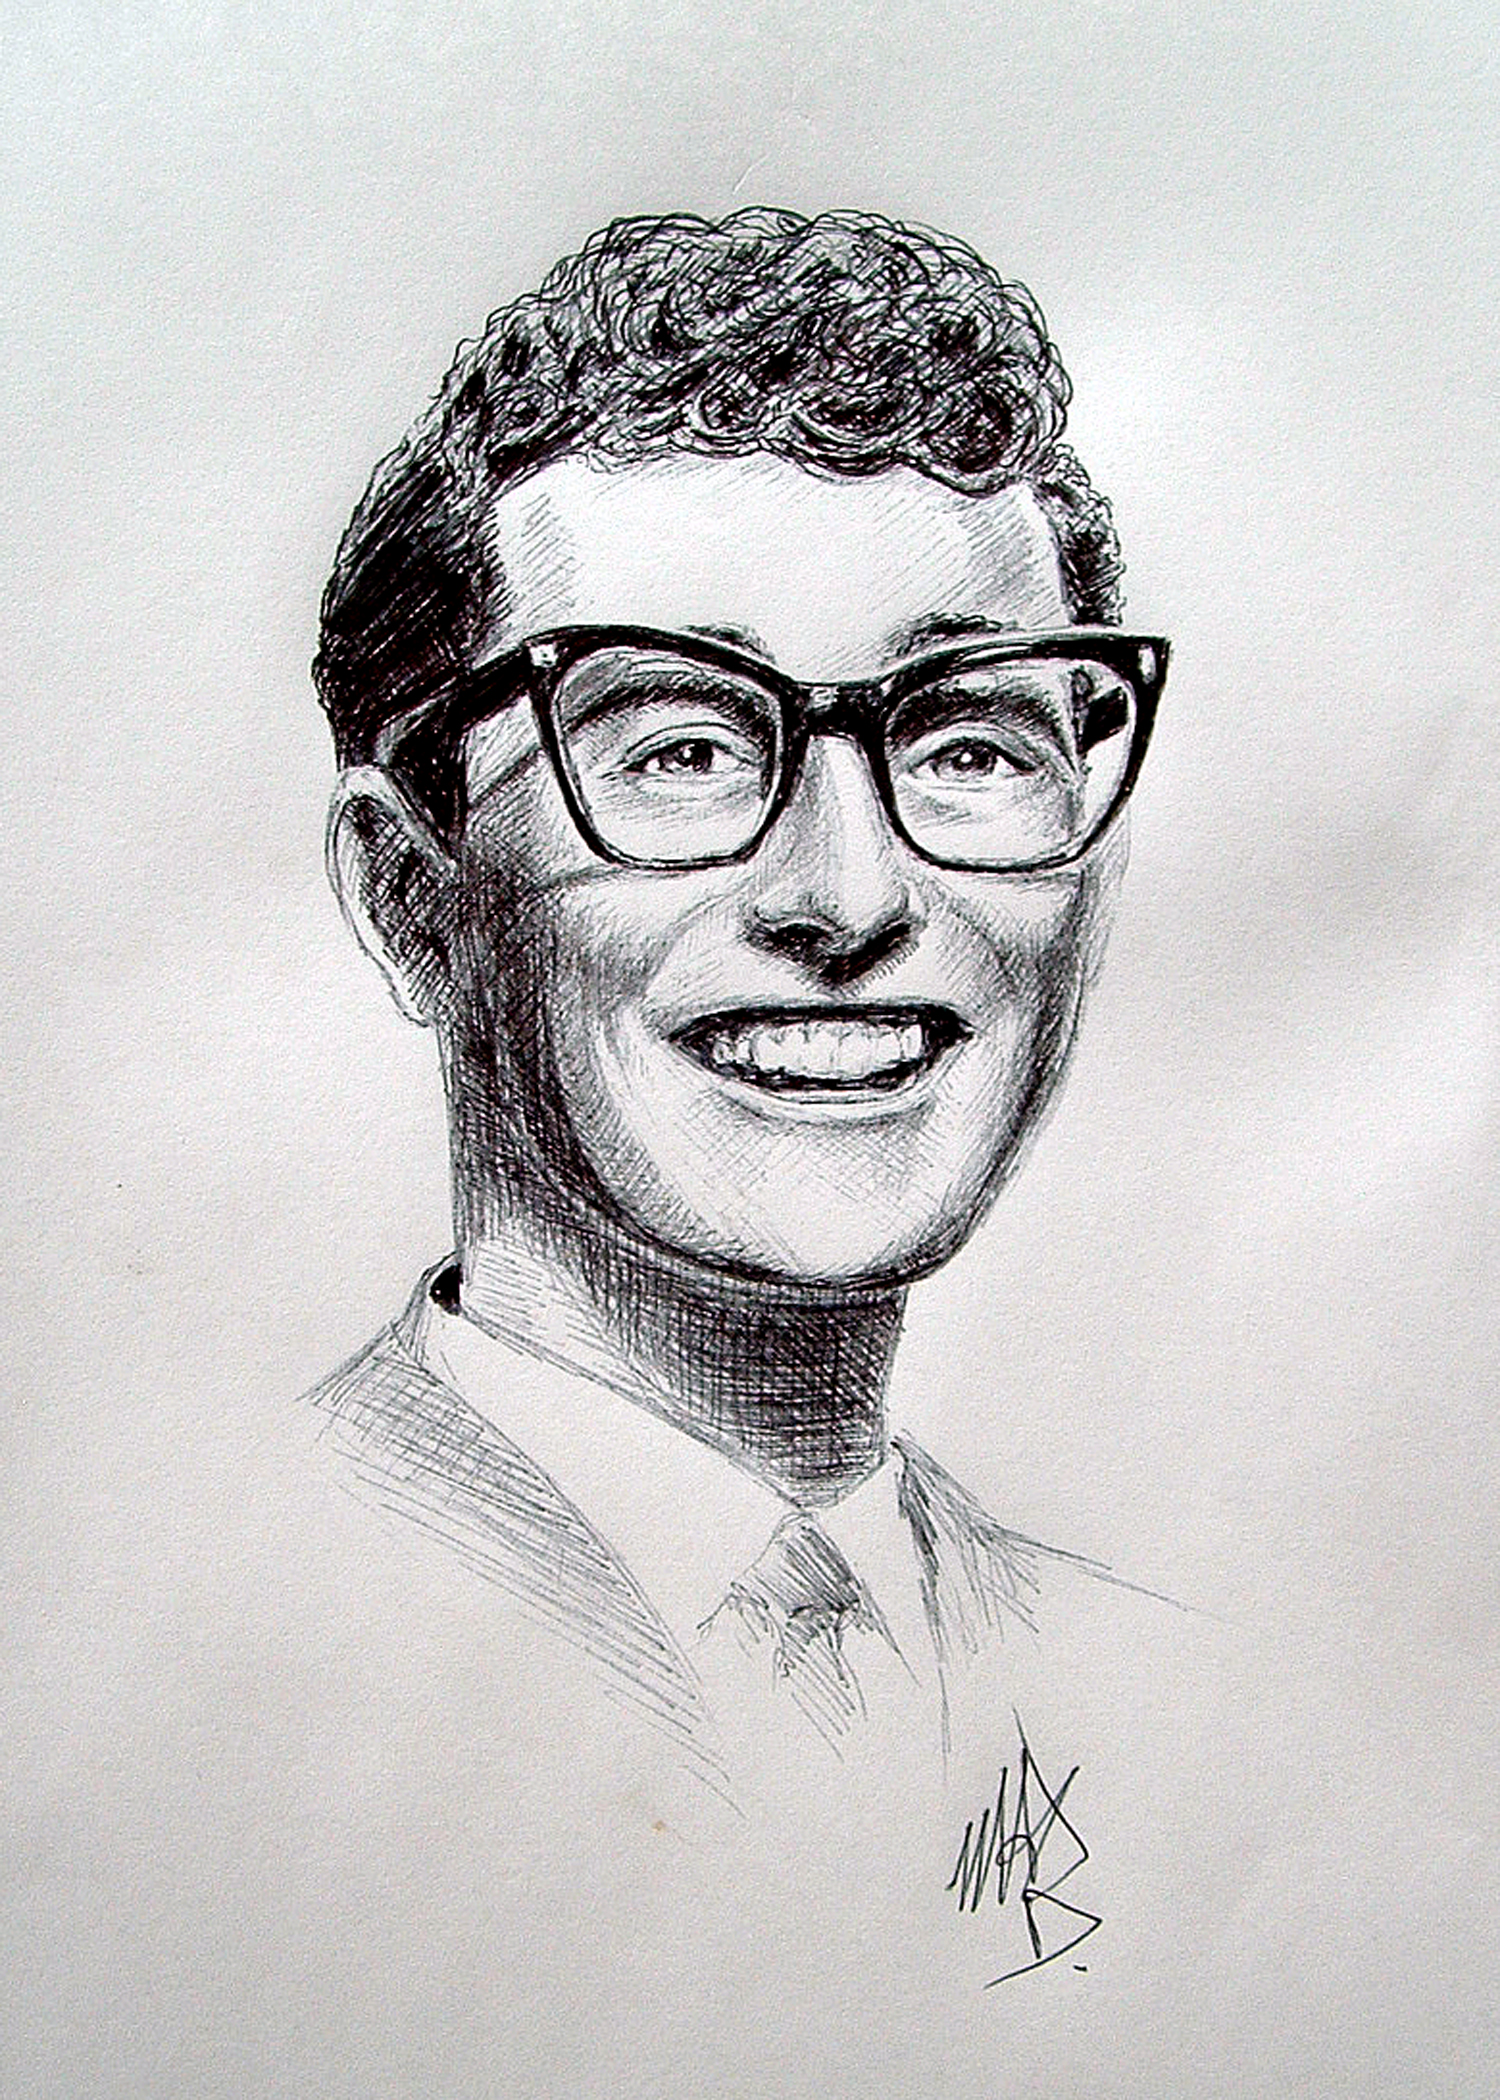 Wallpaper Of The Day Buddy Holly